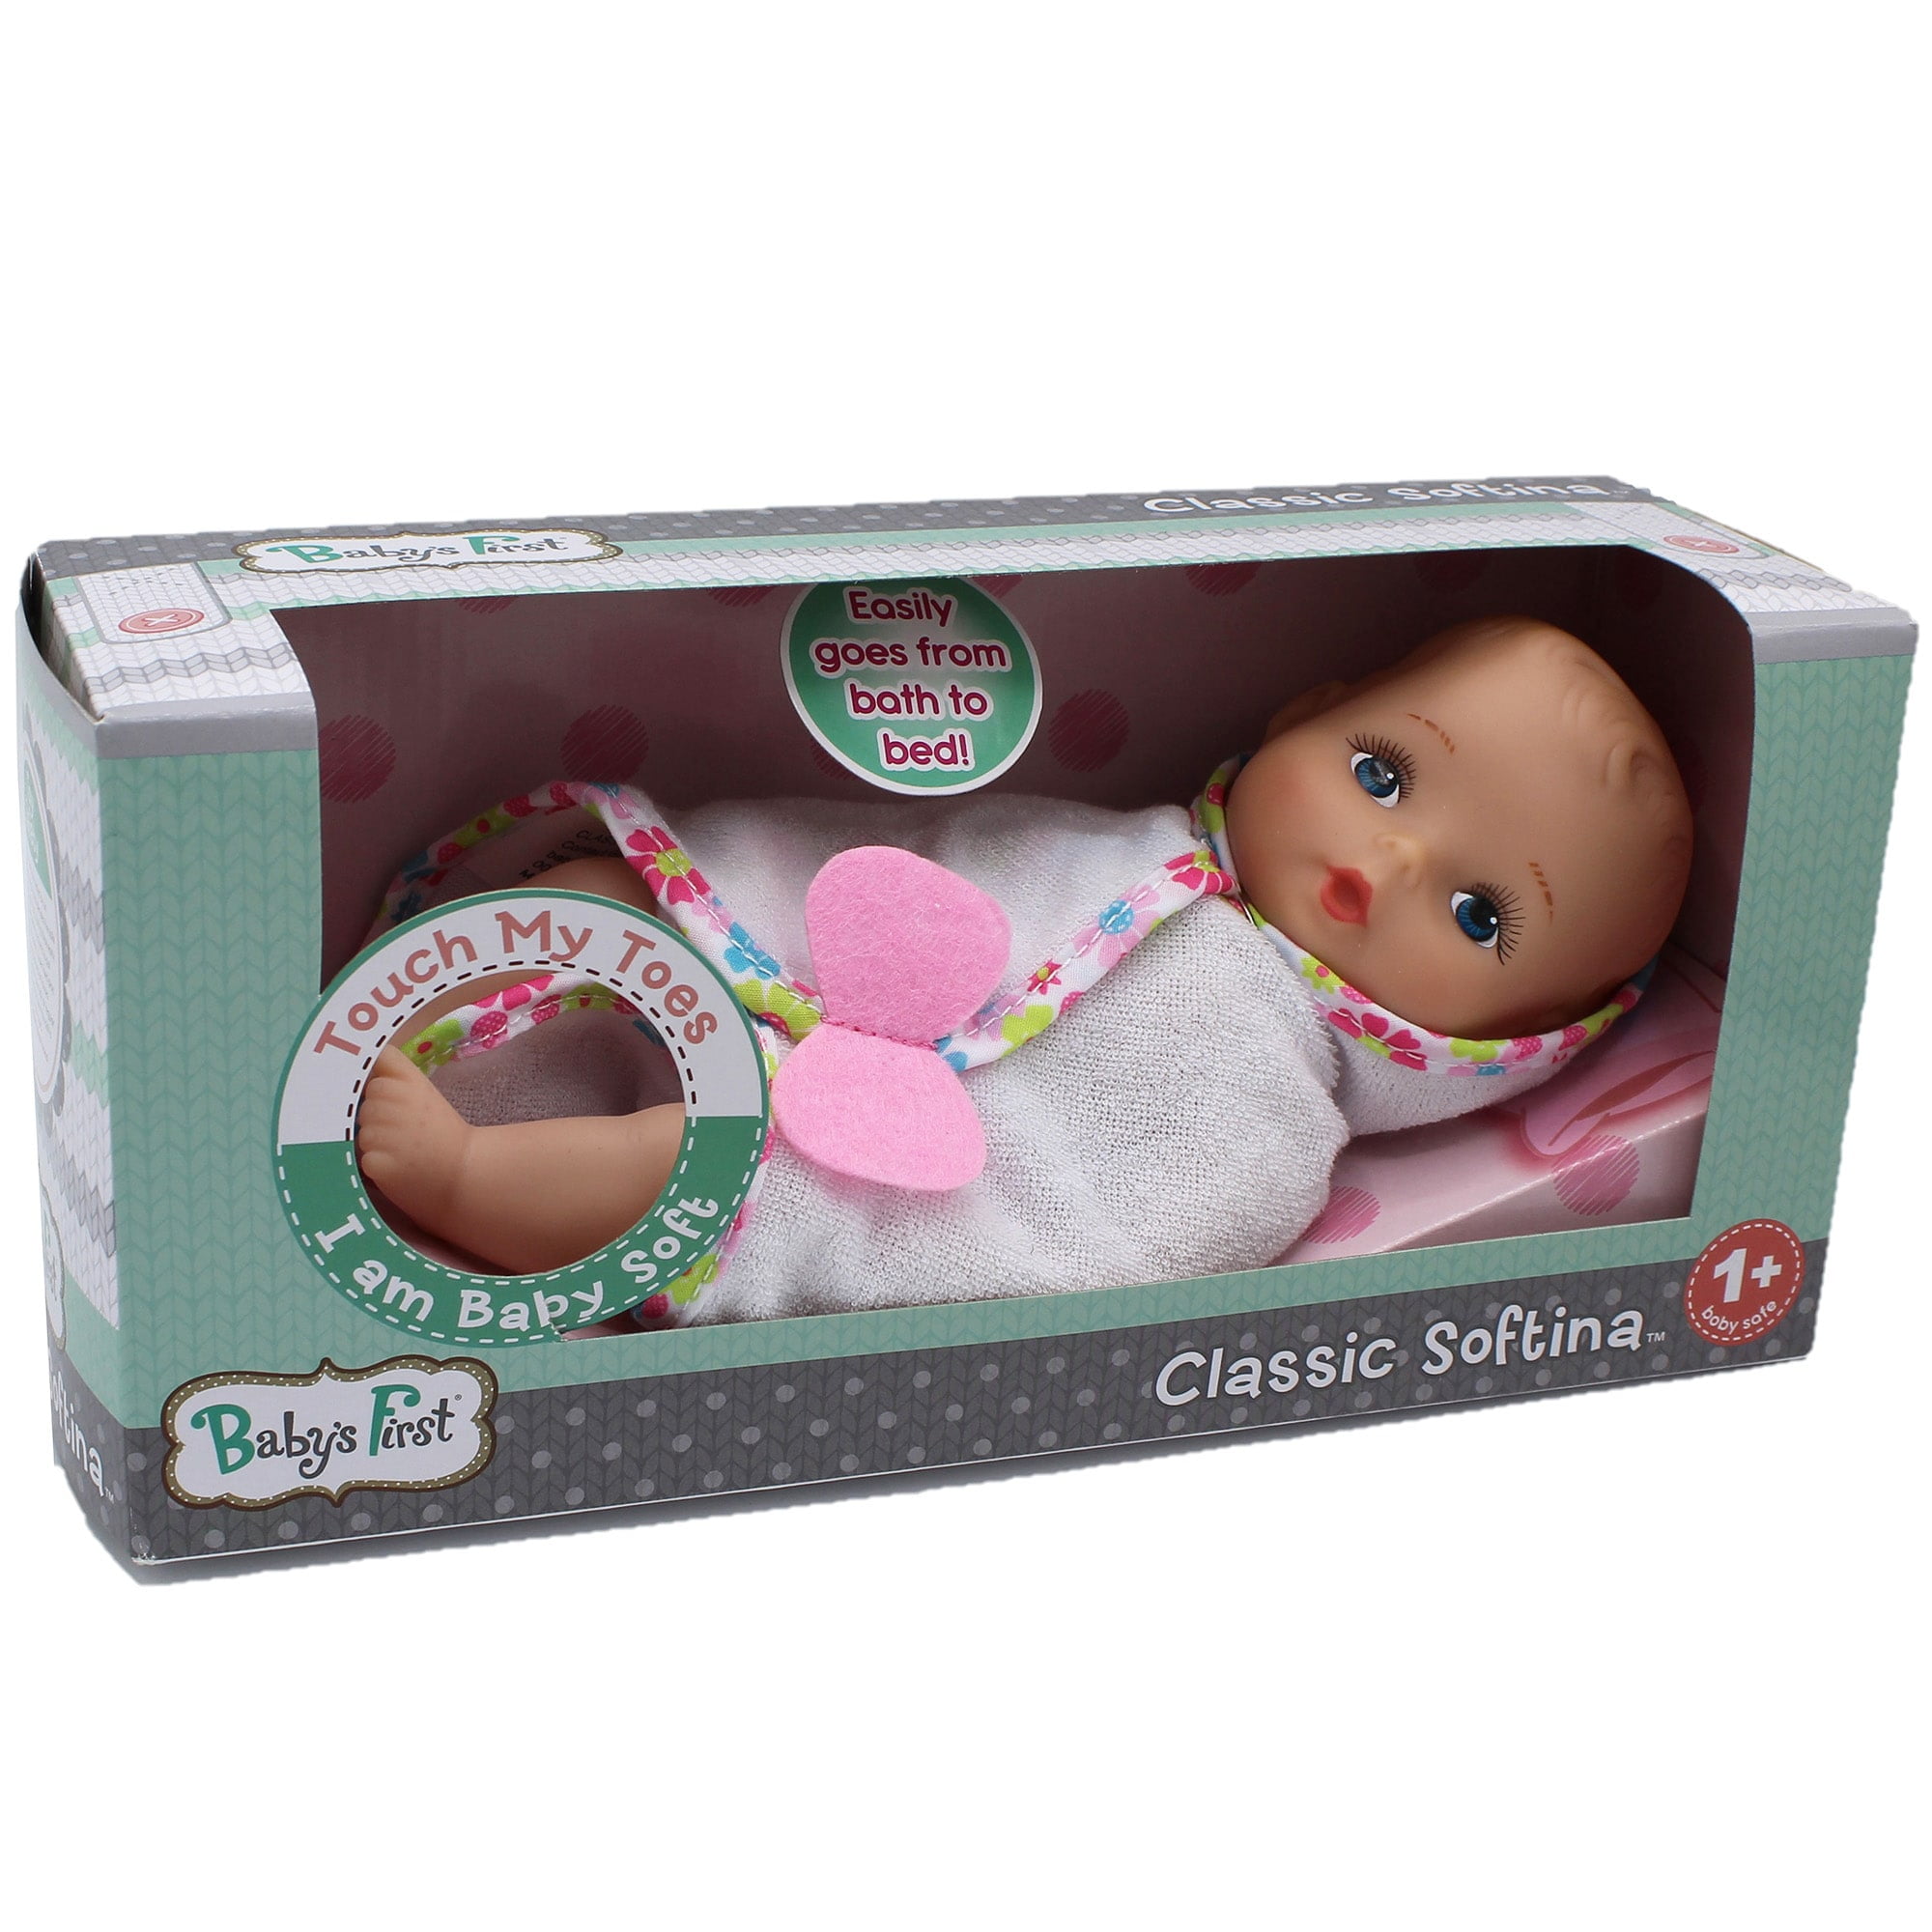 adaline williams recommends baby doll first timers pic